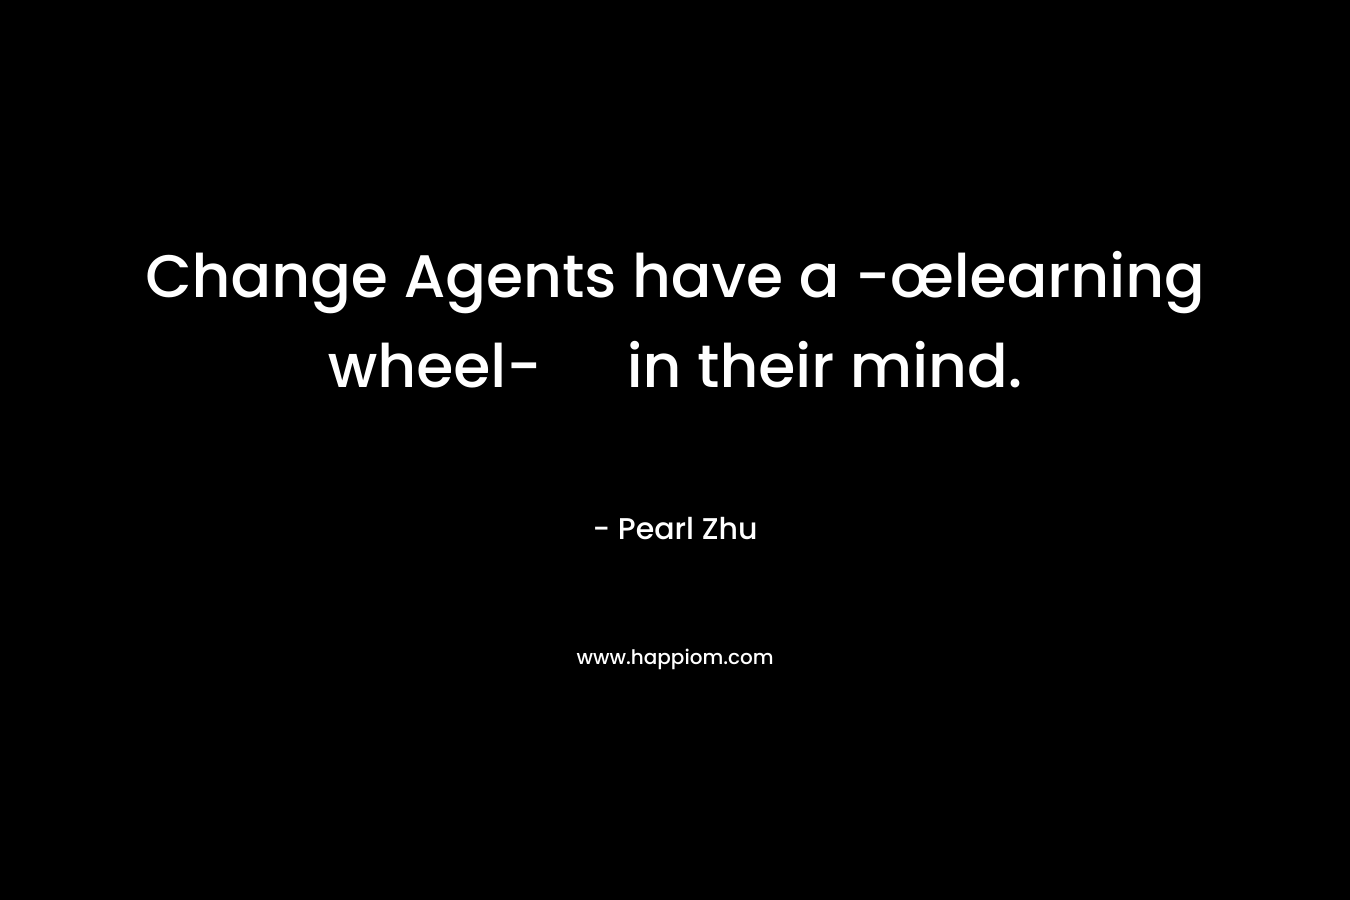 Change Agents have a -œlearning wheel- in their mind.